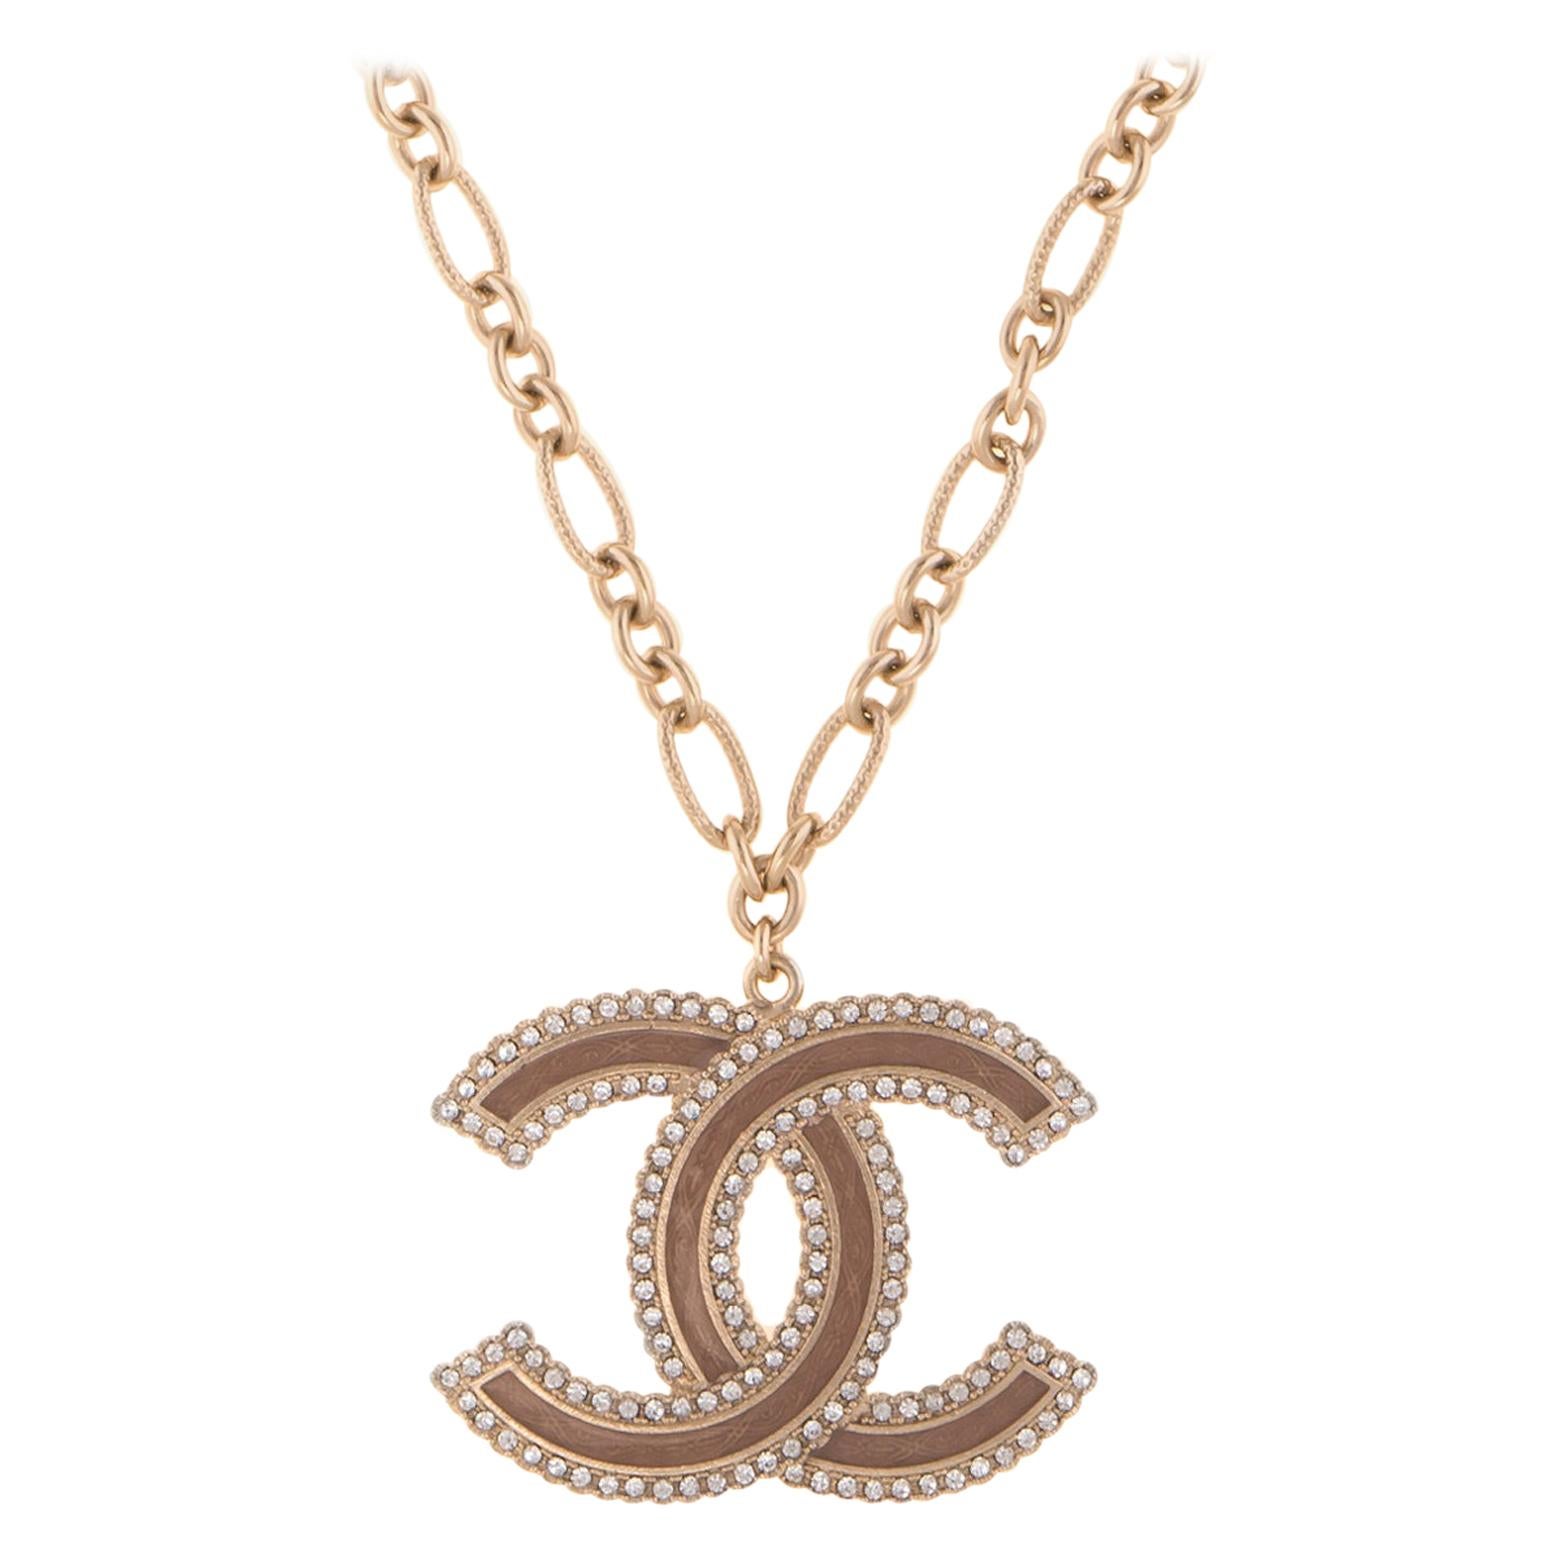 Chanel Double C Logo Crystal Necklace 24" Chain Circa 2015